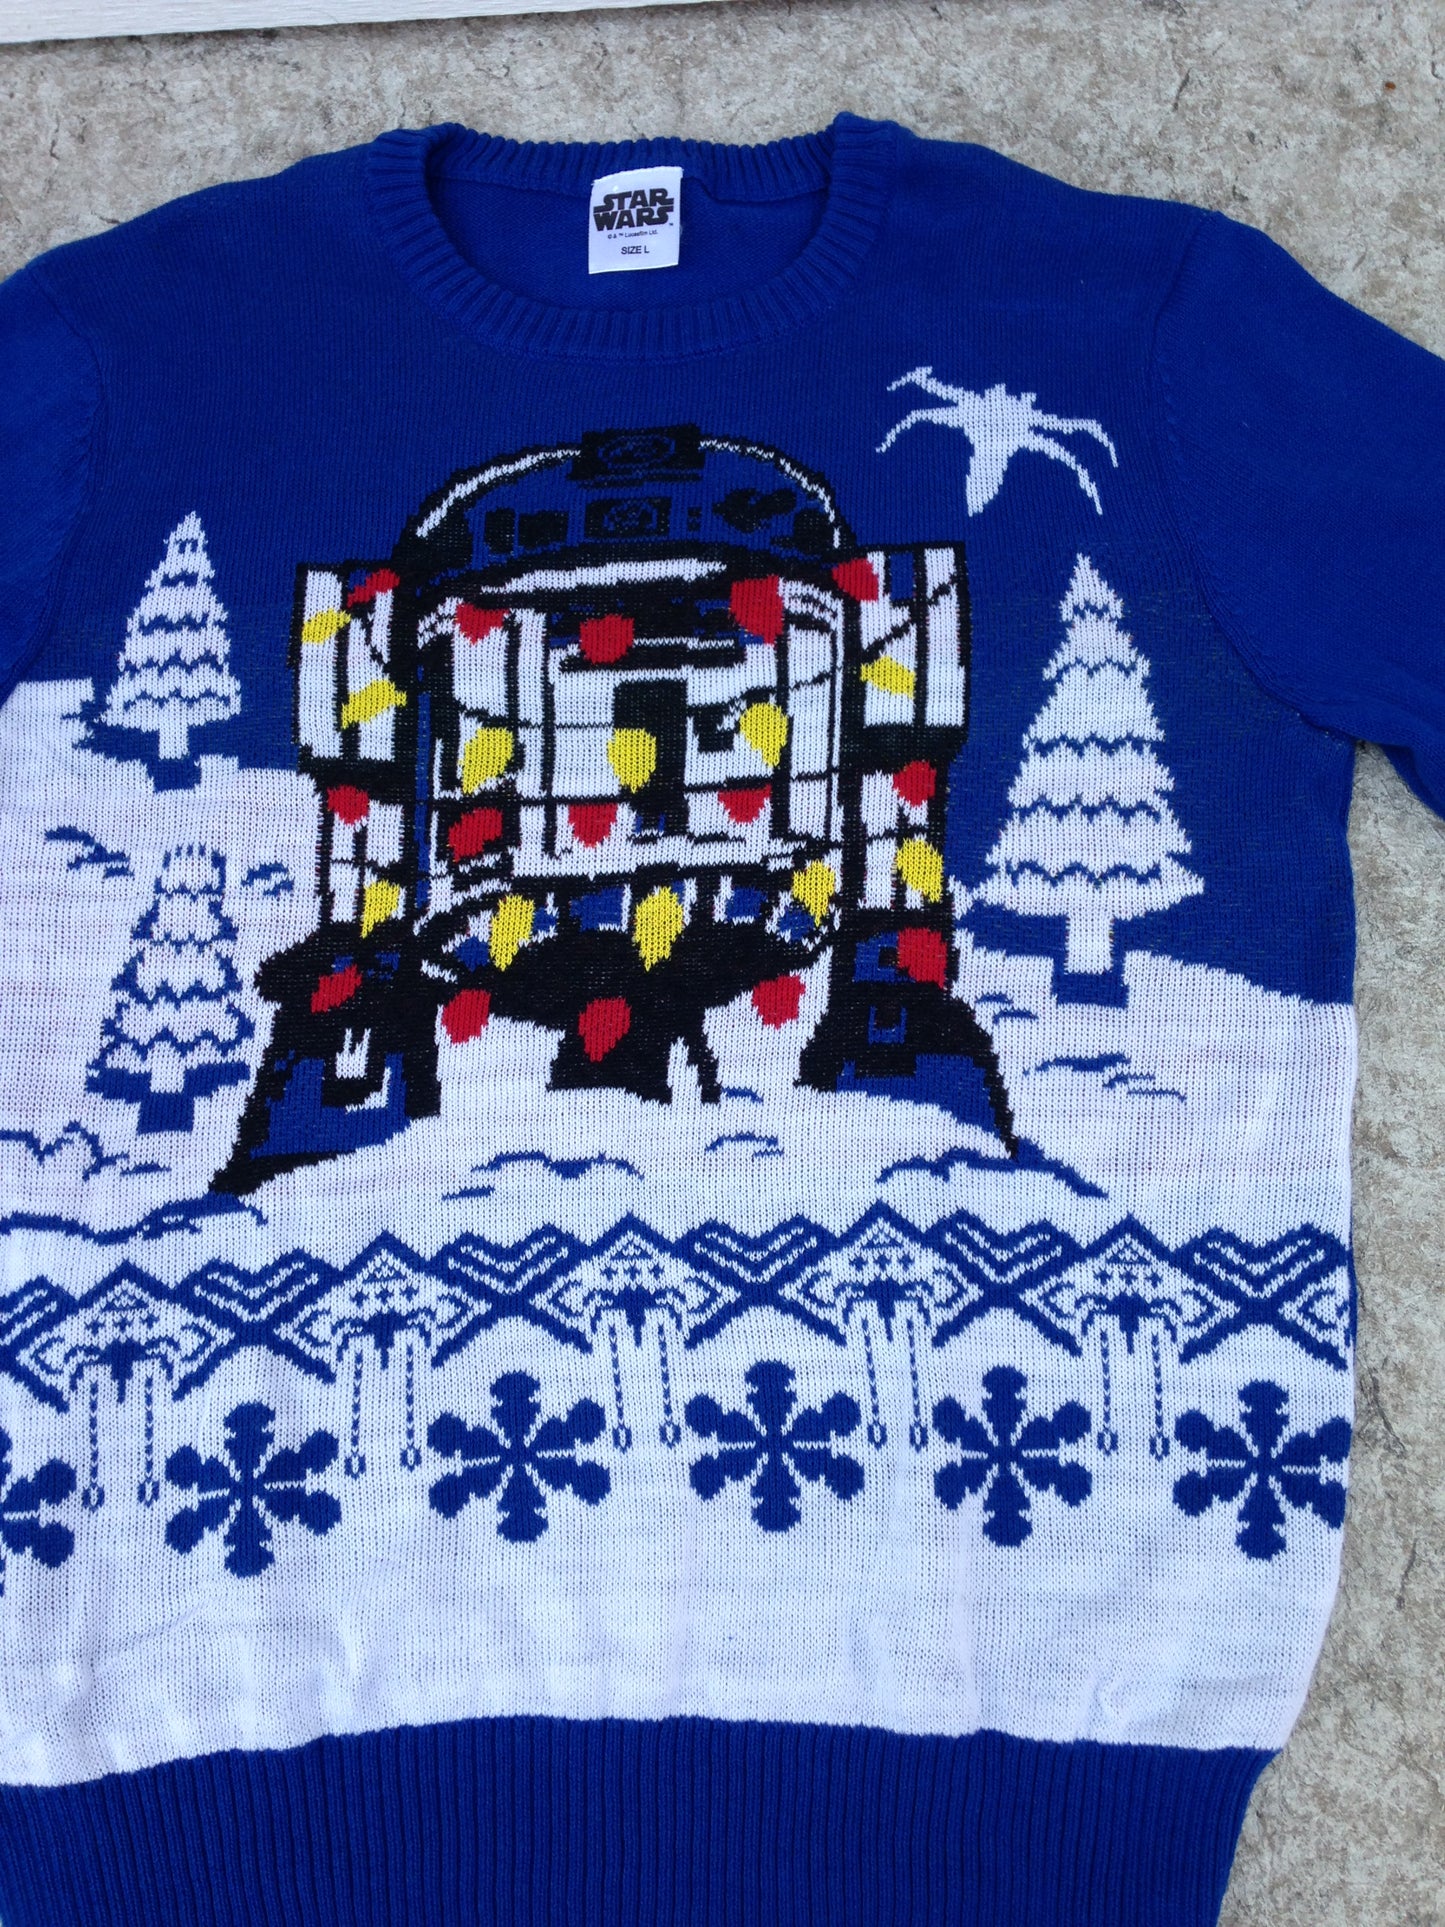 Winter Sweater Men's Size Large  Ugly Christmas Sweater Star Wars R2D2 Blue White New Demo